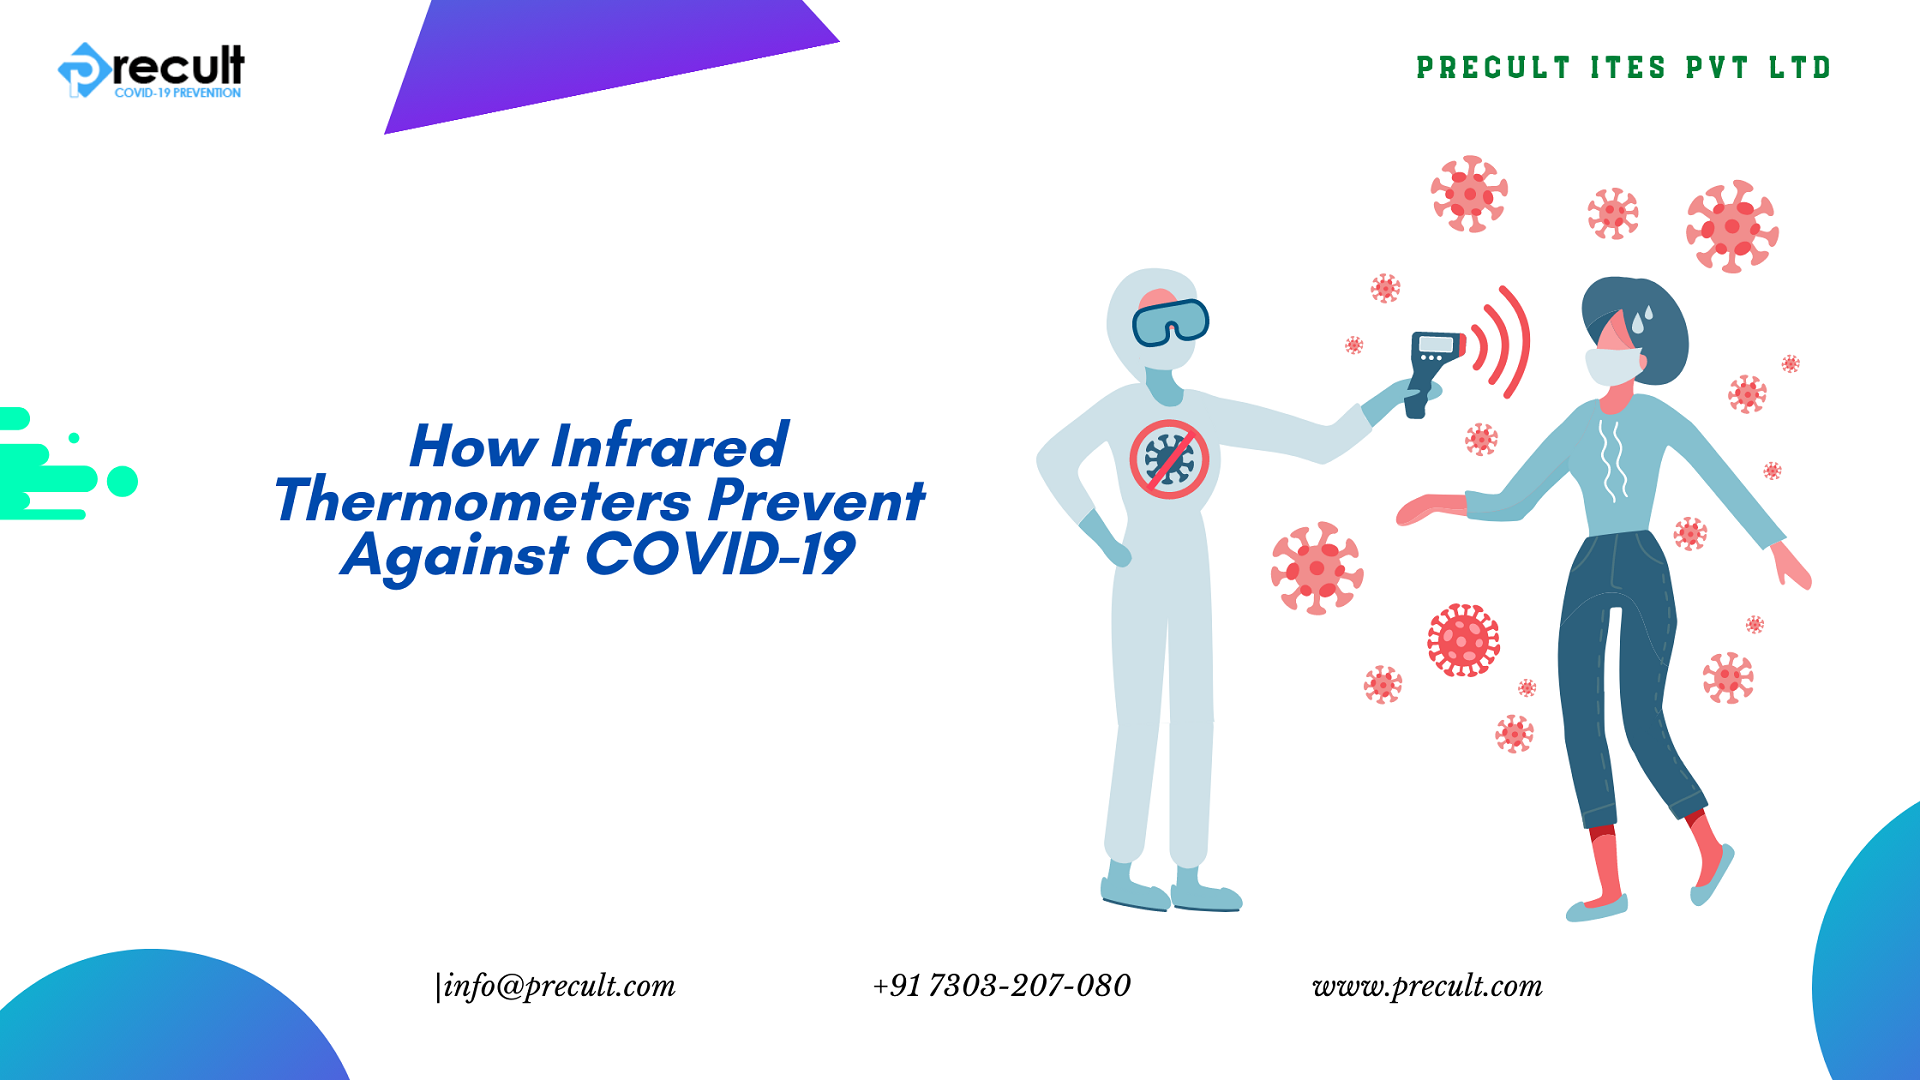 How Infrared Thermometers Prevent Against COVID-19